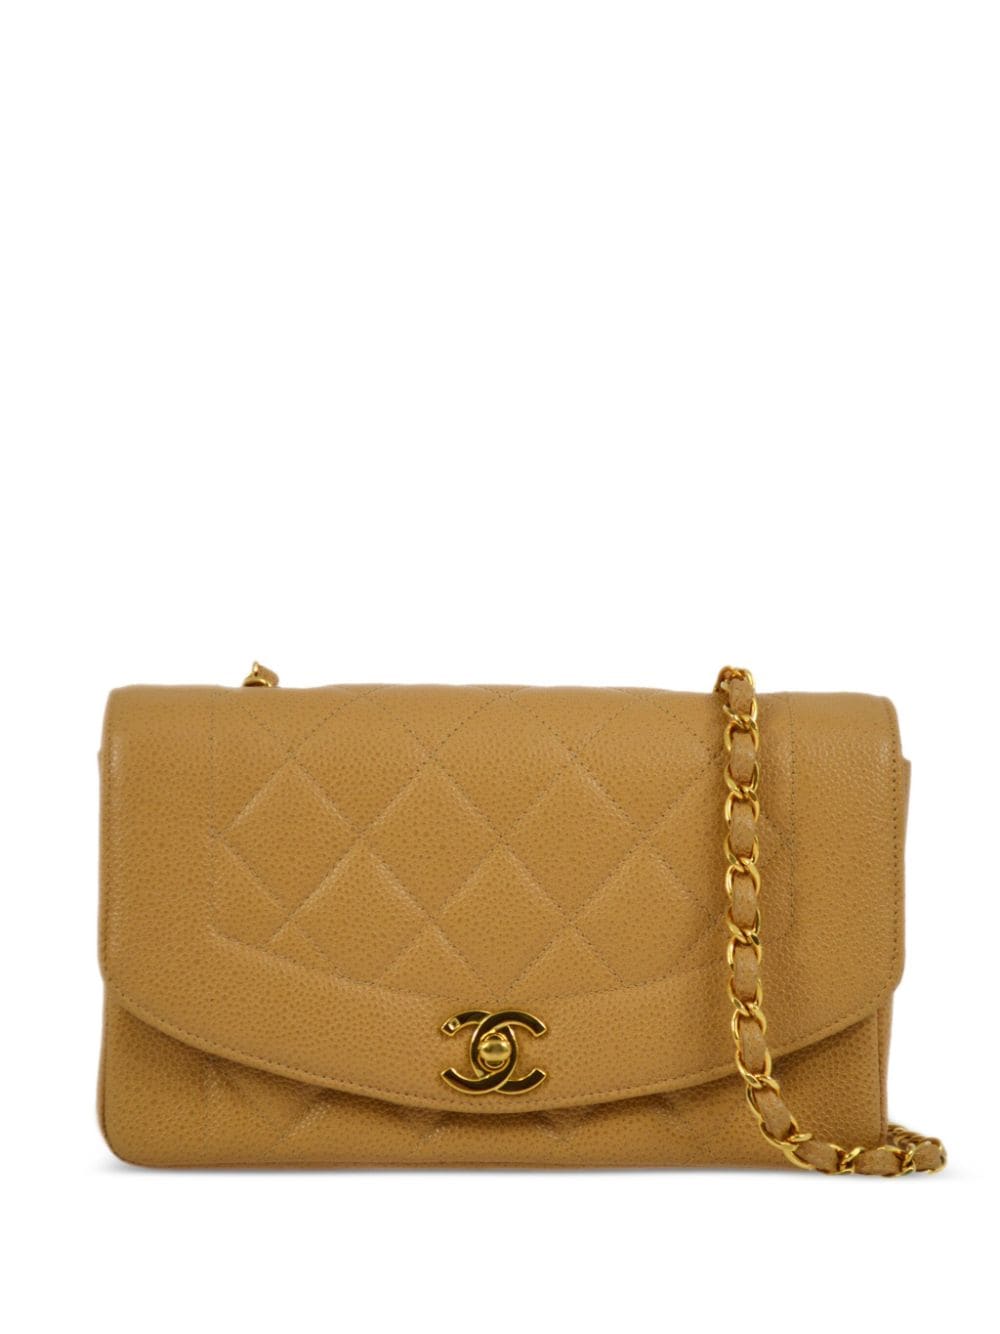 Pre-owned Chanel 1995 Small Diana Shoulder Bag In Neutrals